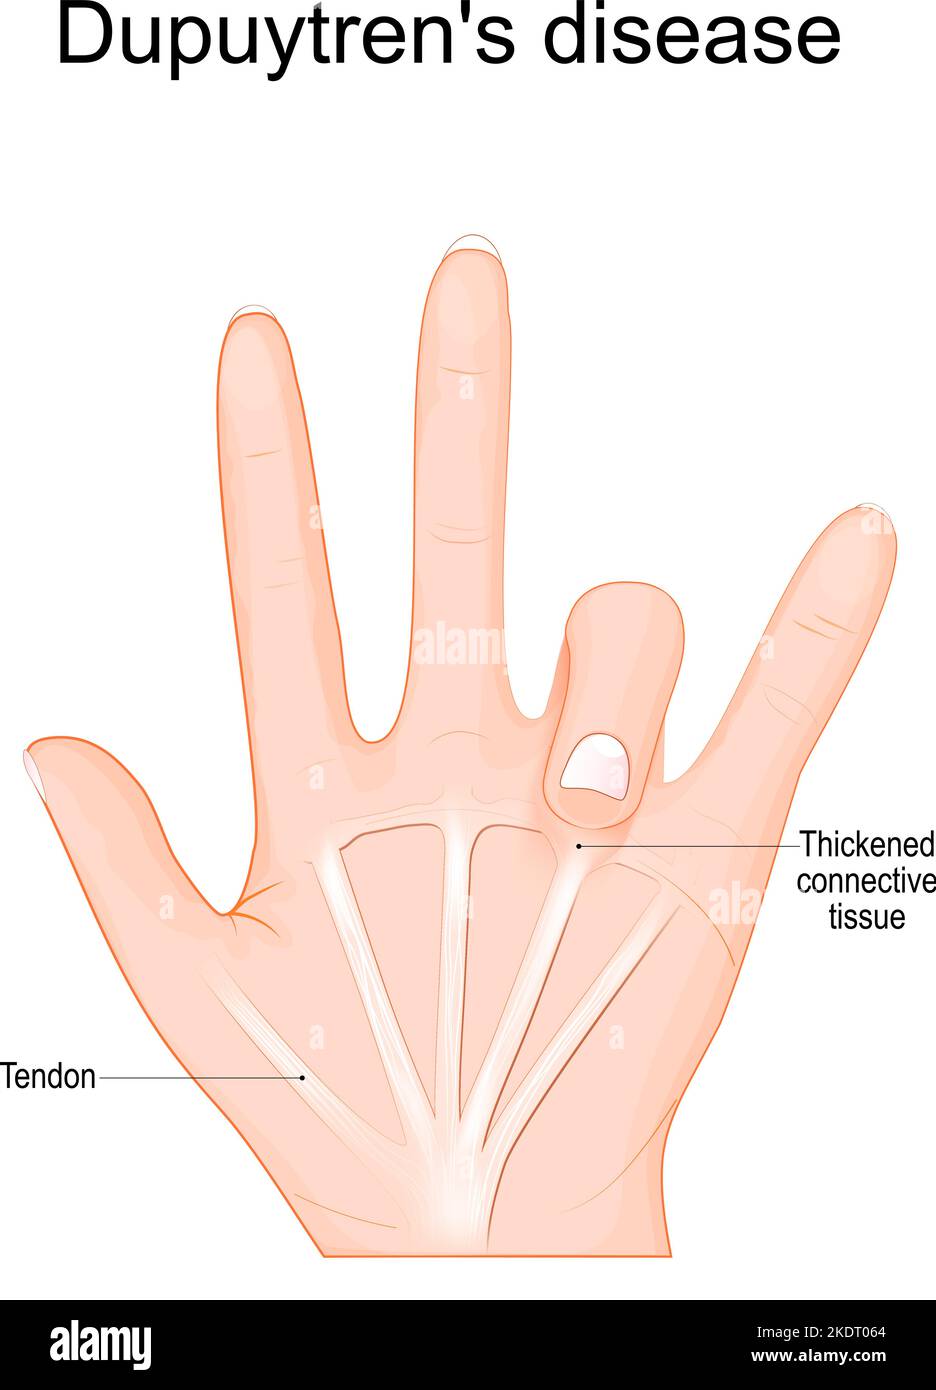 Dupuytren's disease. Human hand with Tendons and Thickened connective tissue under one finger. Vector illustration Stock Vector